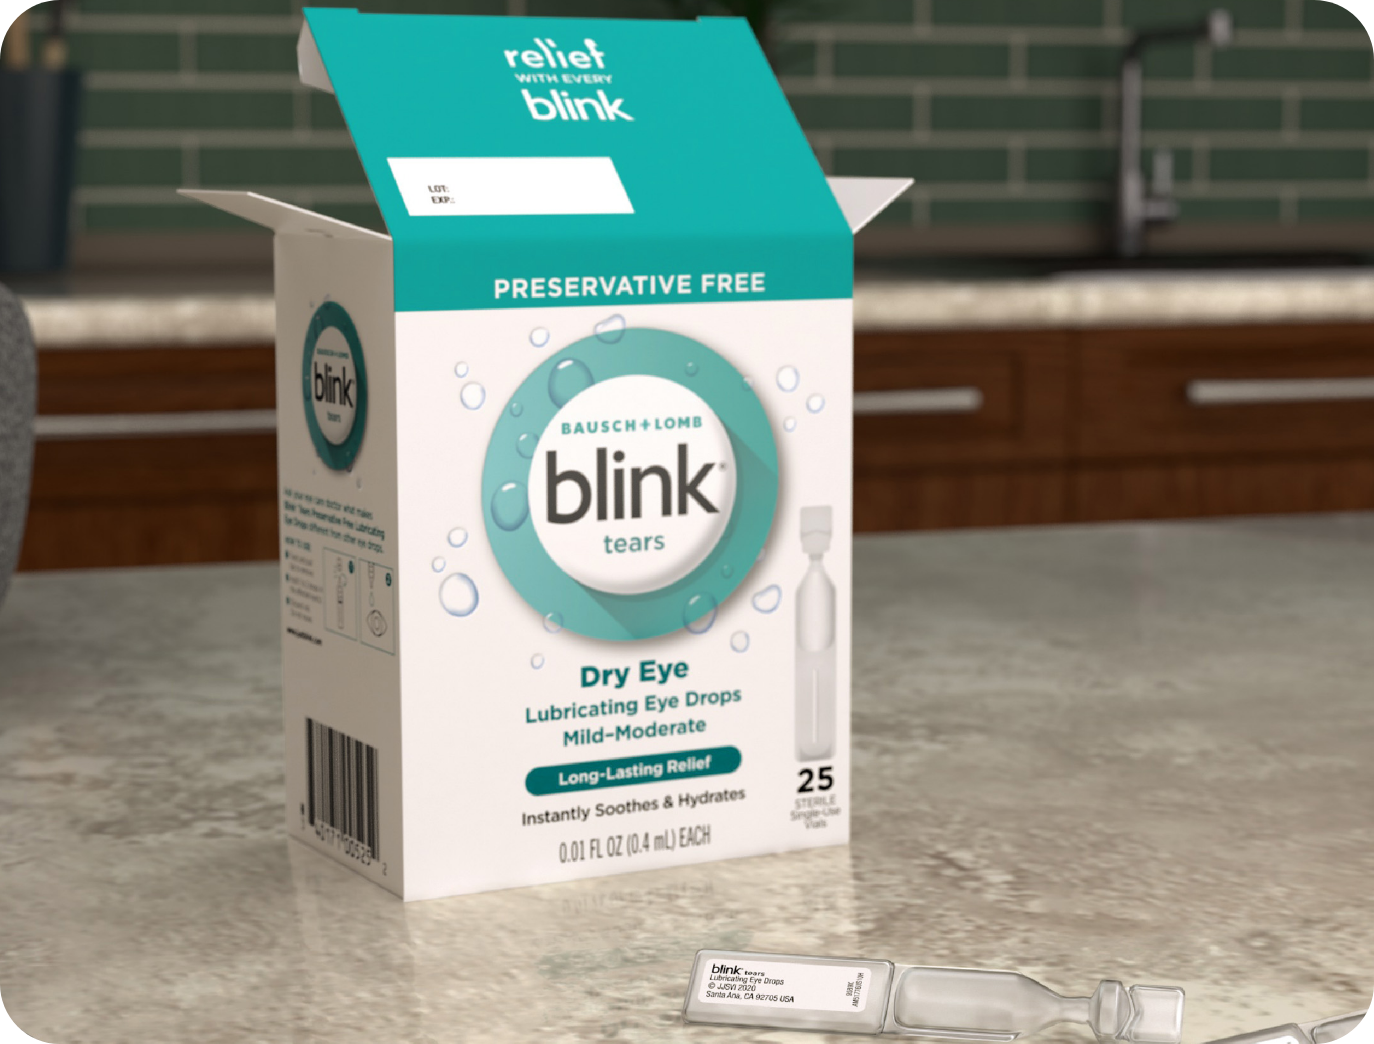 Single-use vial of Blink Tears Preservative Free lies on a counter next to its carton